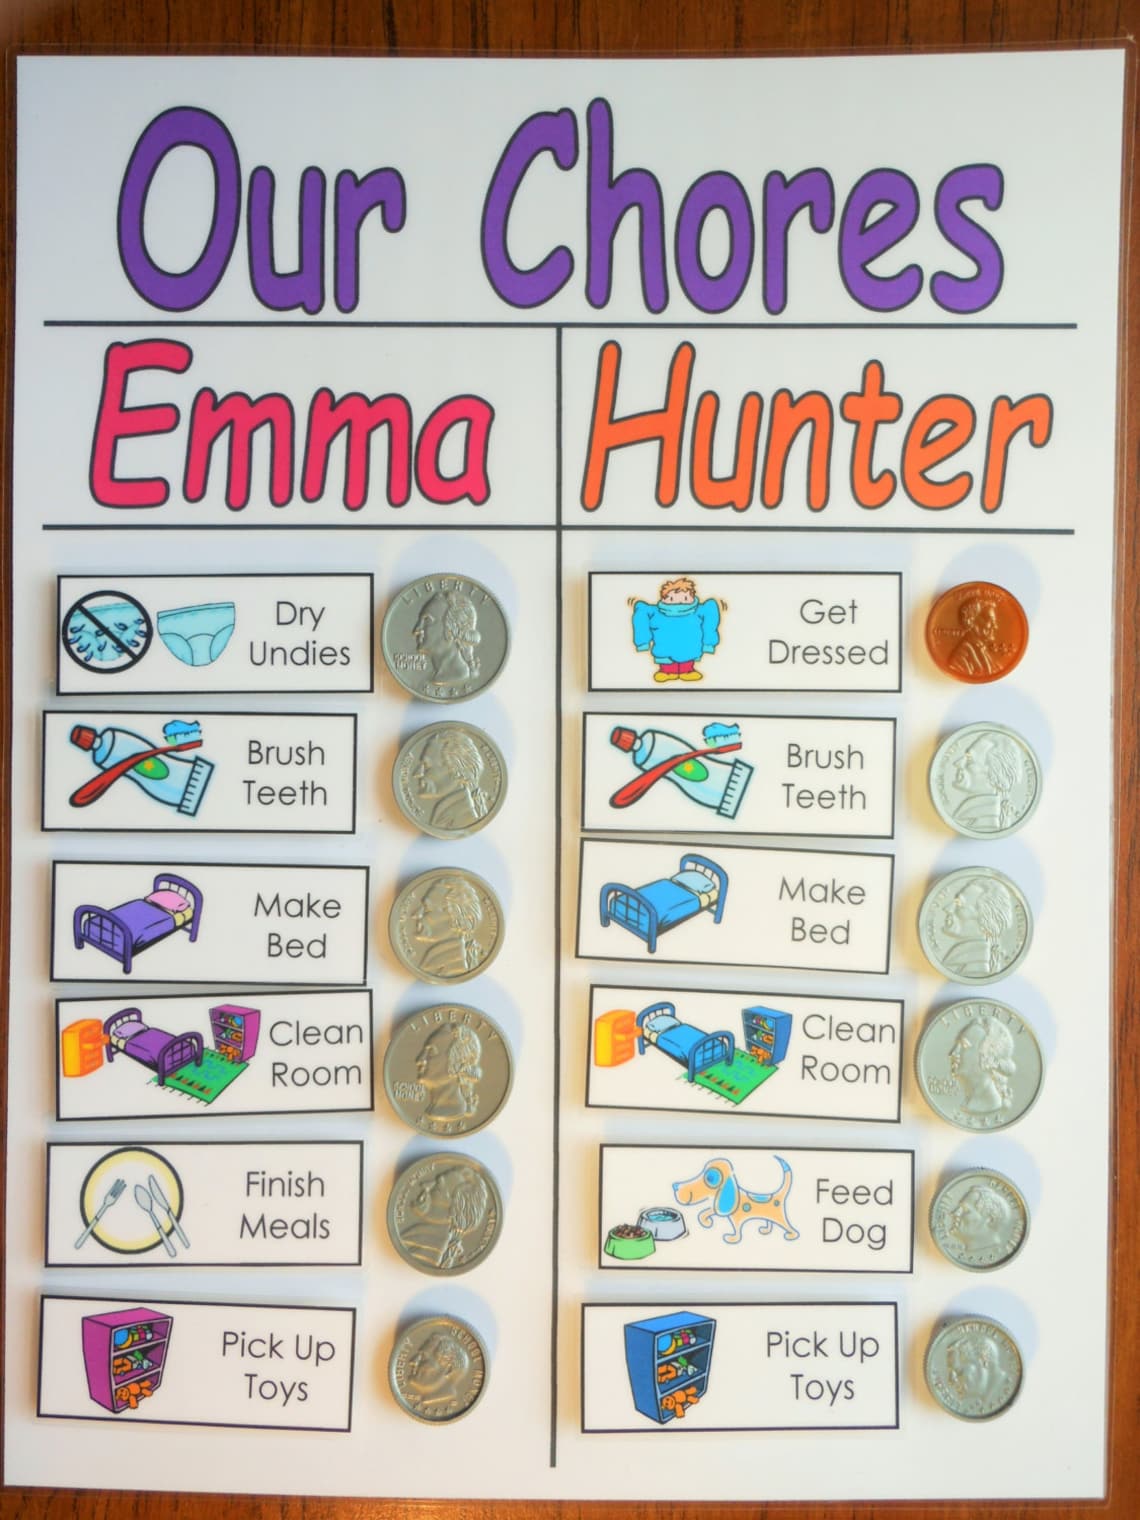 multi-kid-daily-allowance-chore-chart-daily-checklist-to-do-etsy